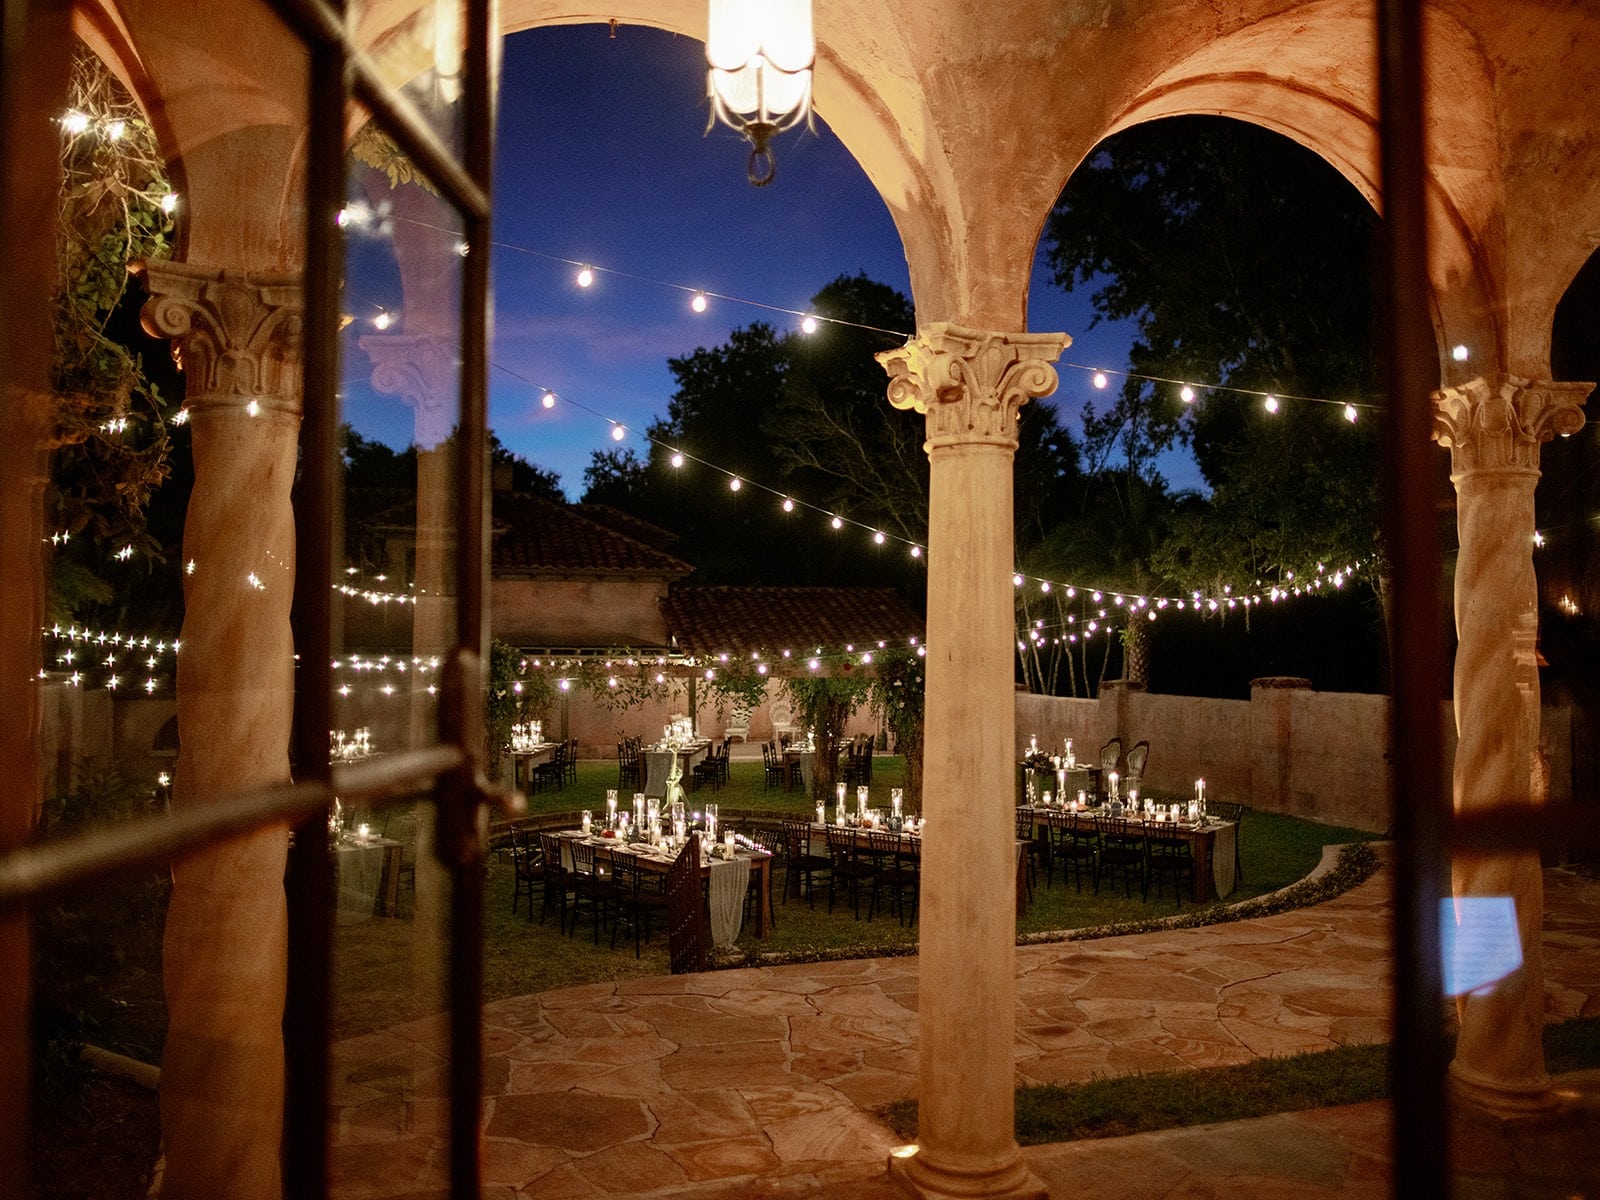 strings of lights over tables in open courtyard outside